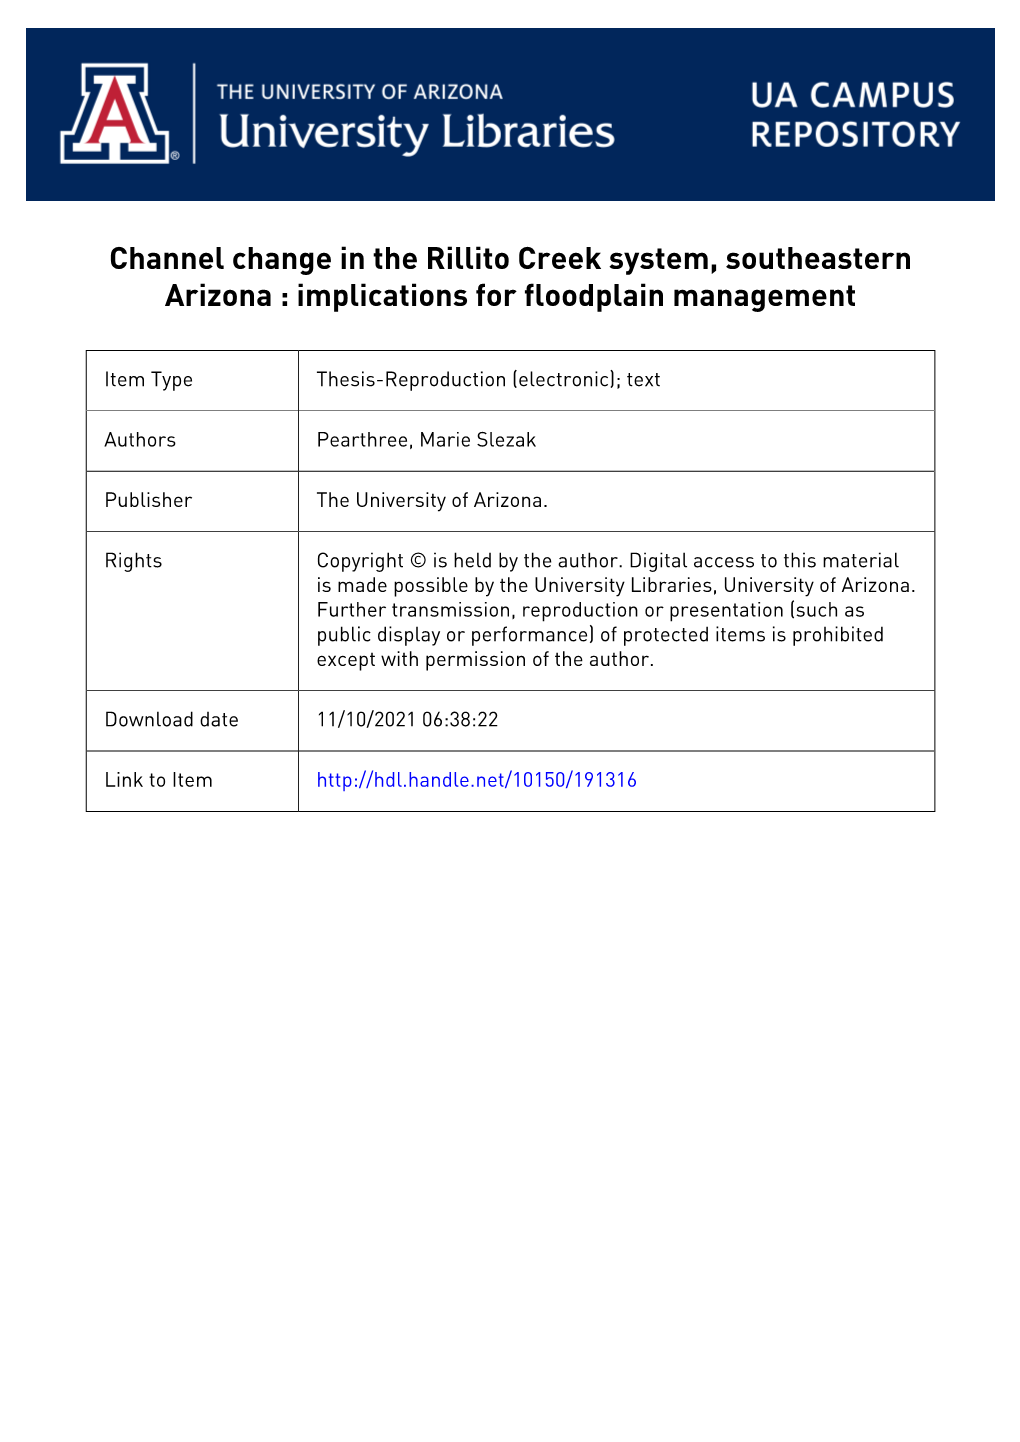 Channel Change in the Rillito Creek System, Southeastern Arizona : Implications for Floodplain Management